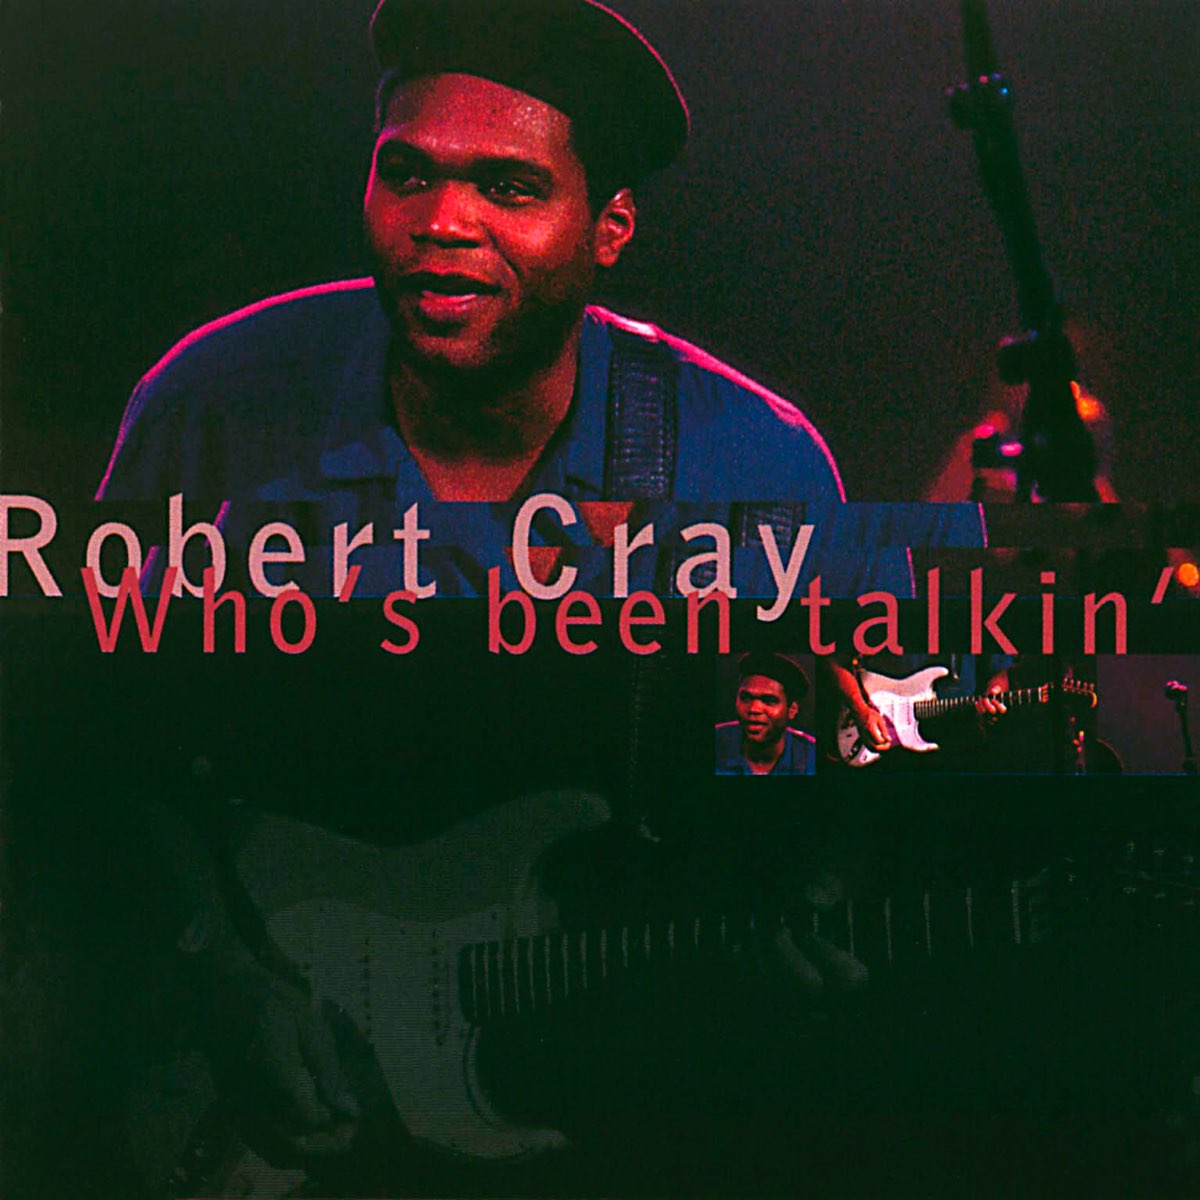 Who's Been Talkin' by Robert Cray on Apple Music